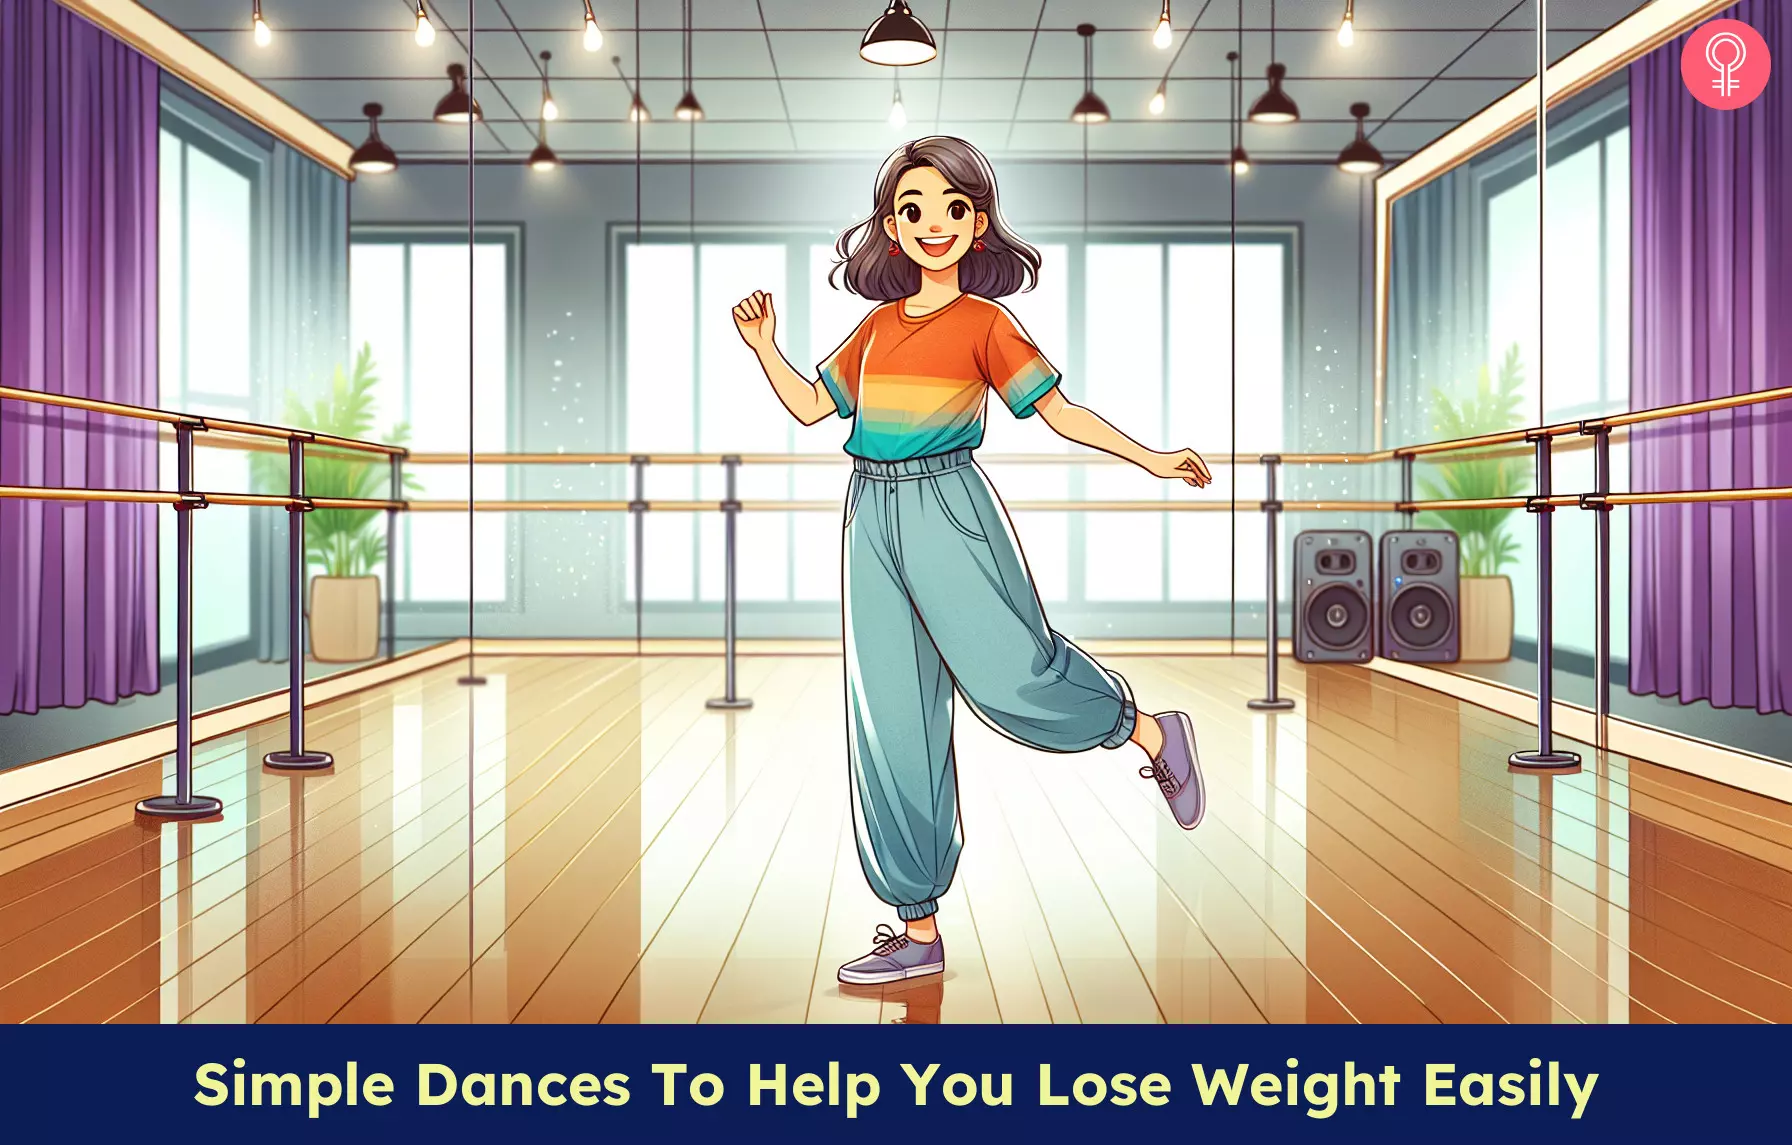 10 Simple Dances To Help You Lose Weight Easily